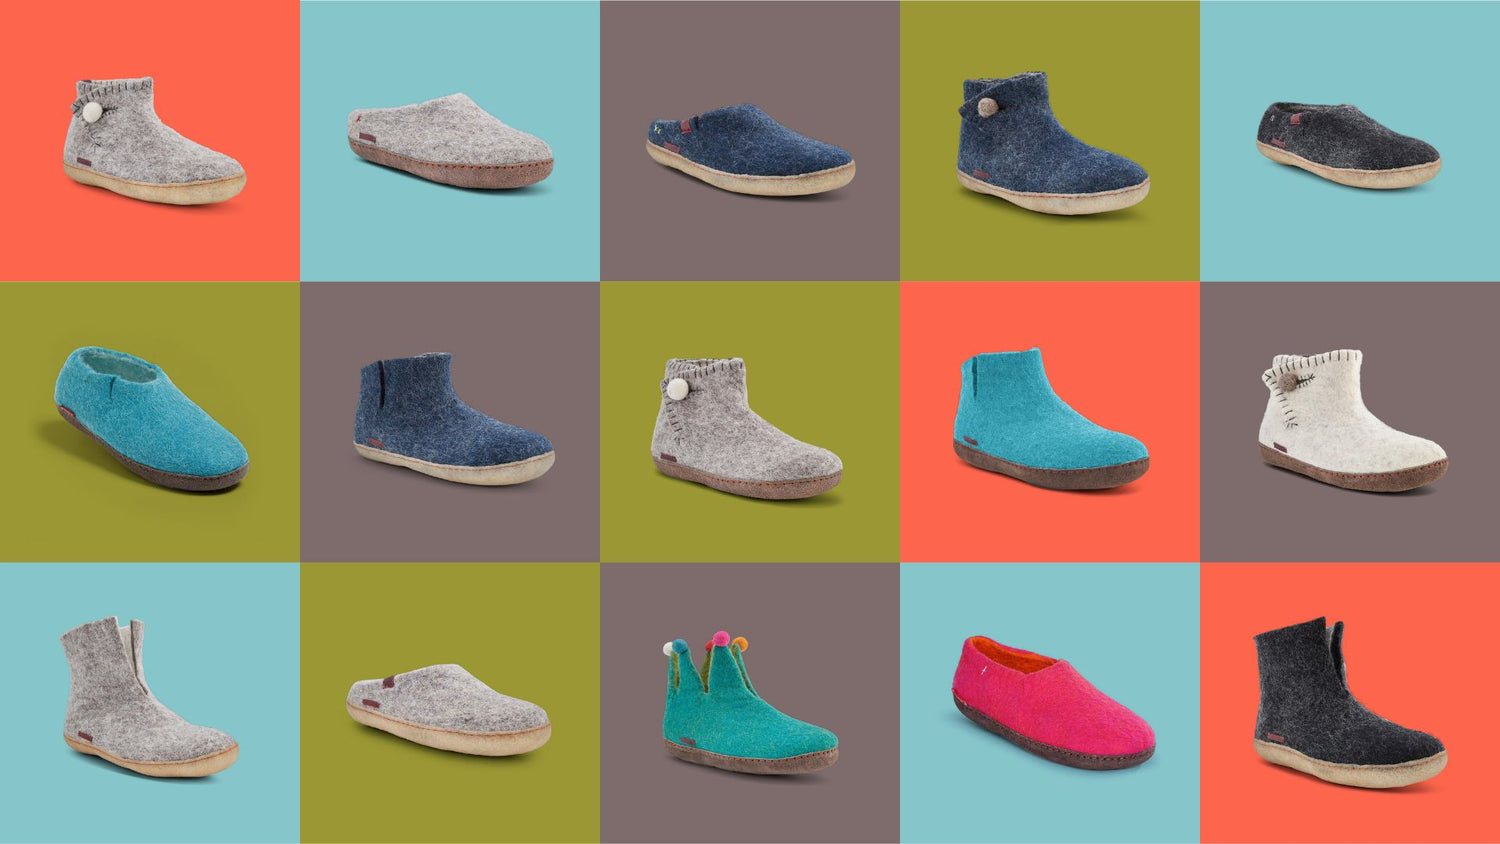 Mosaic of various Betterfelt felt wool slippers, shoes and boots.